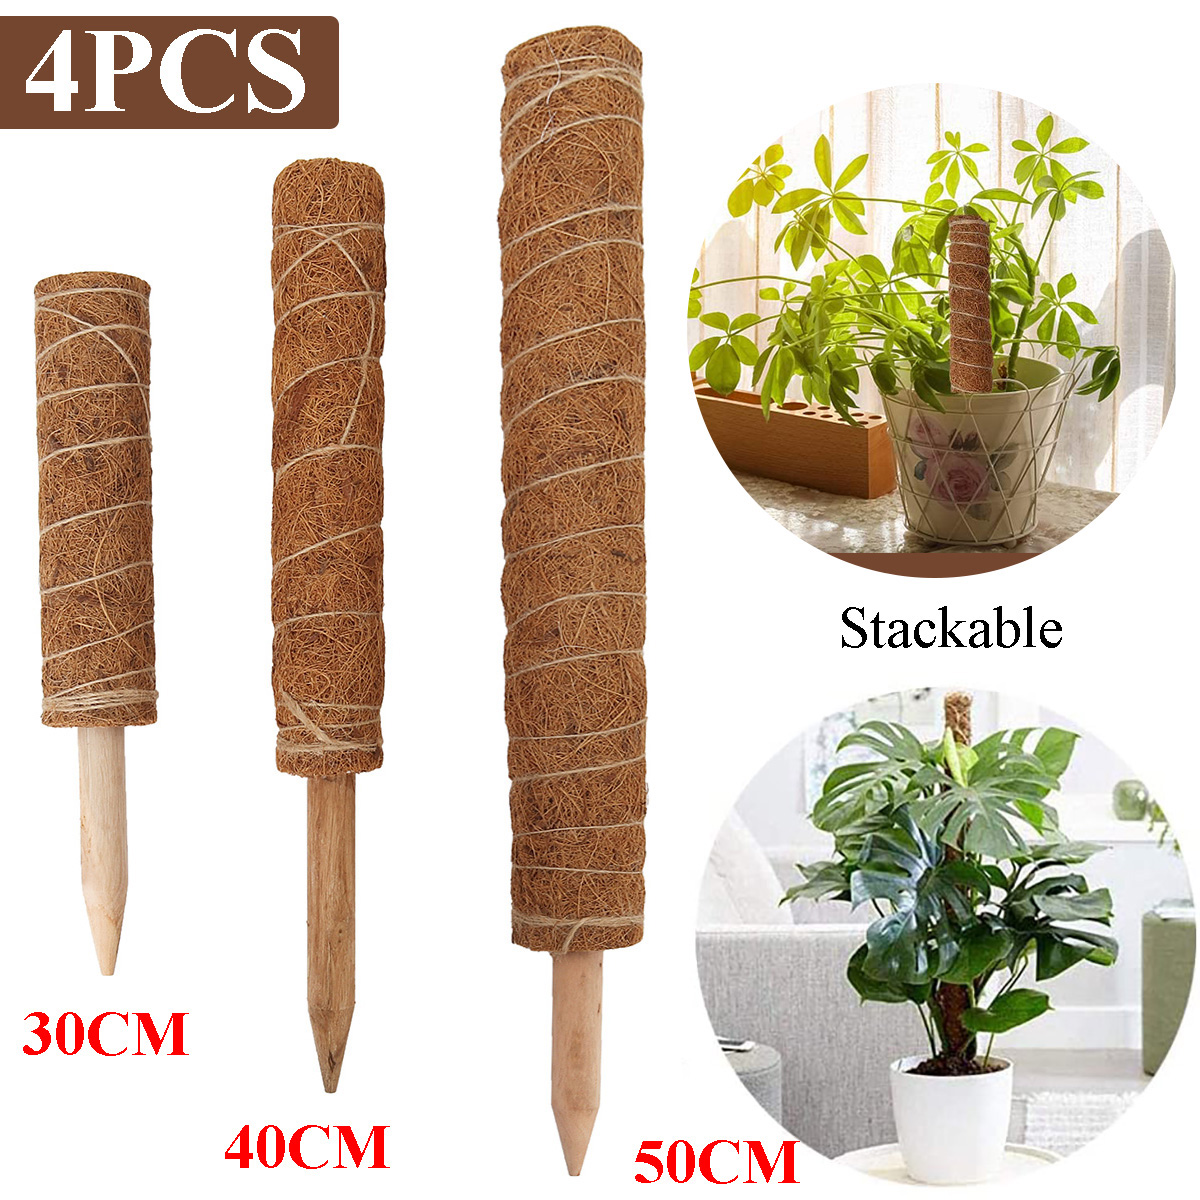 4-Pack-Coir-Totem-Pole-Plant-Coir-Moss-Stick-Totem-Pole-for-Climmbing-Plant-Support-Extension-Climbi-1824346-1